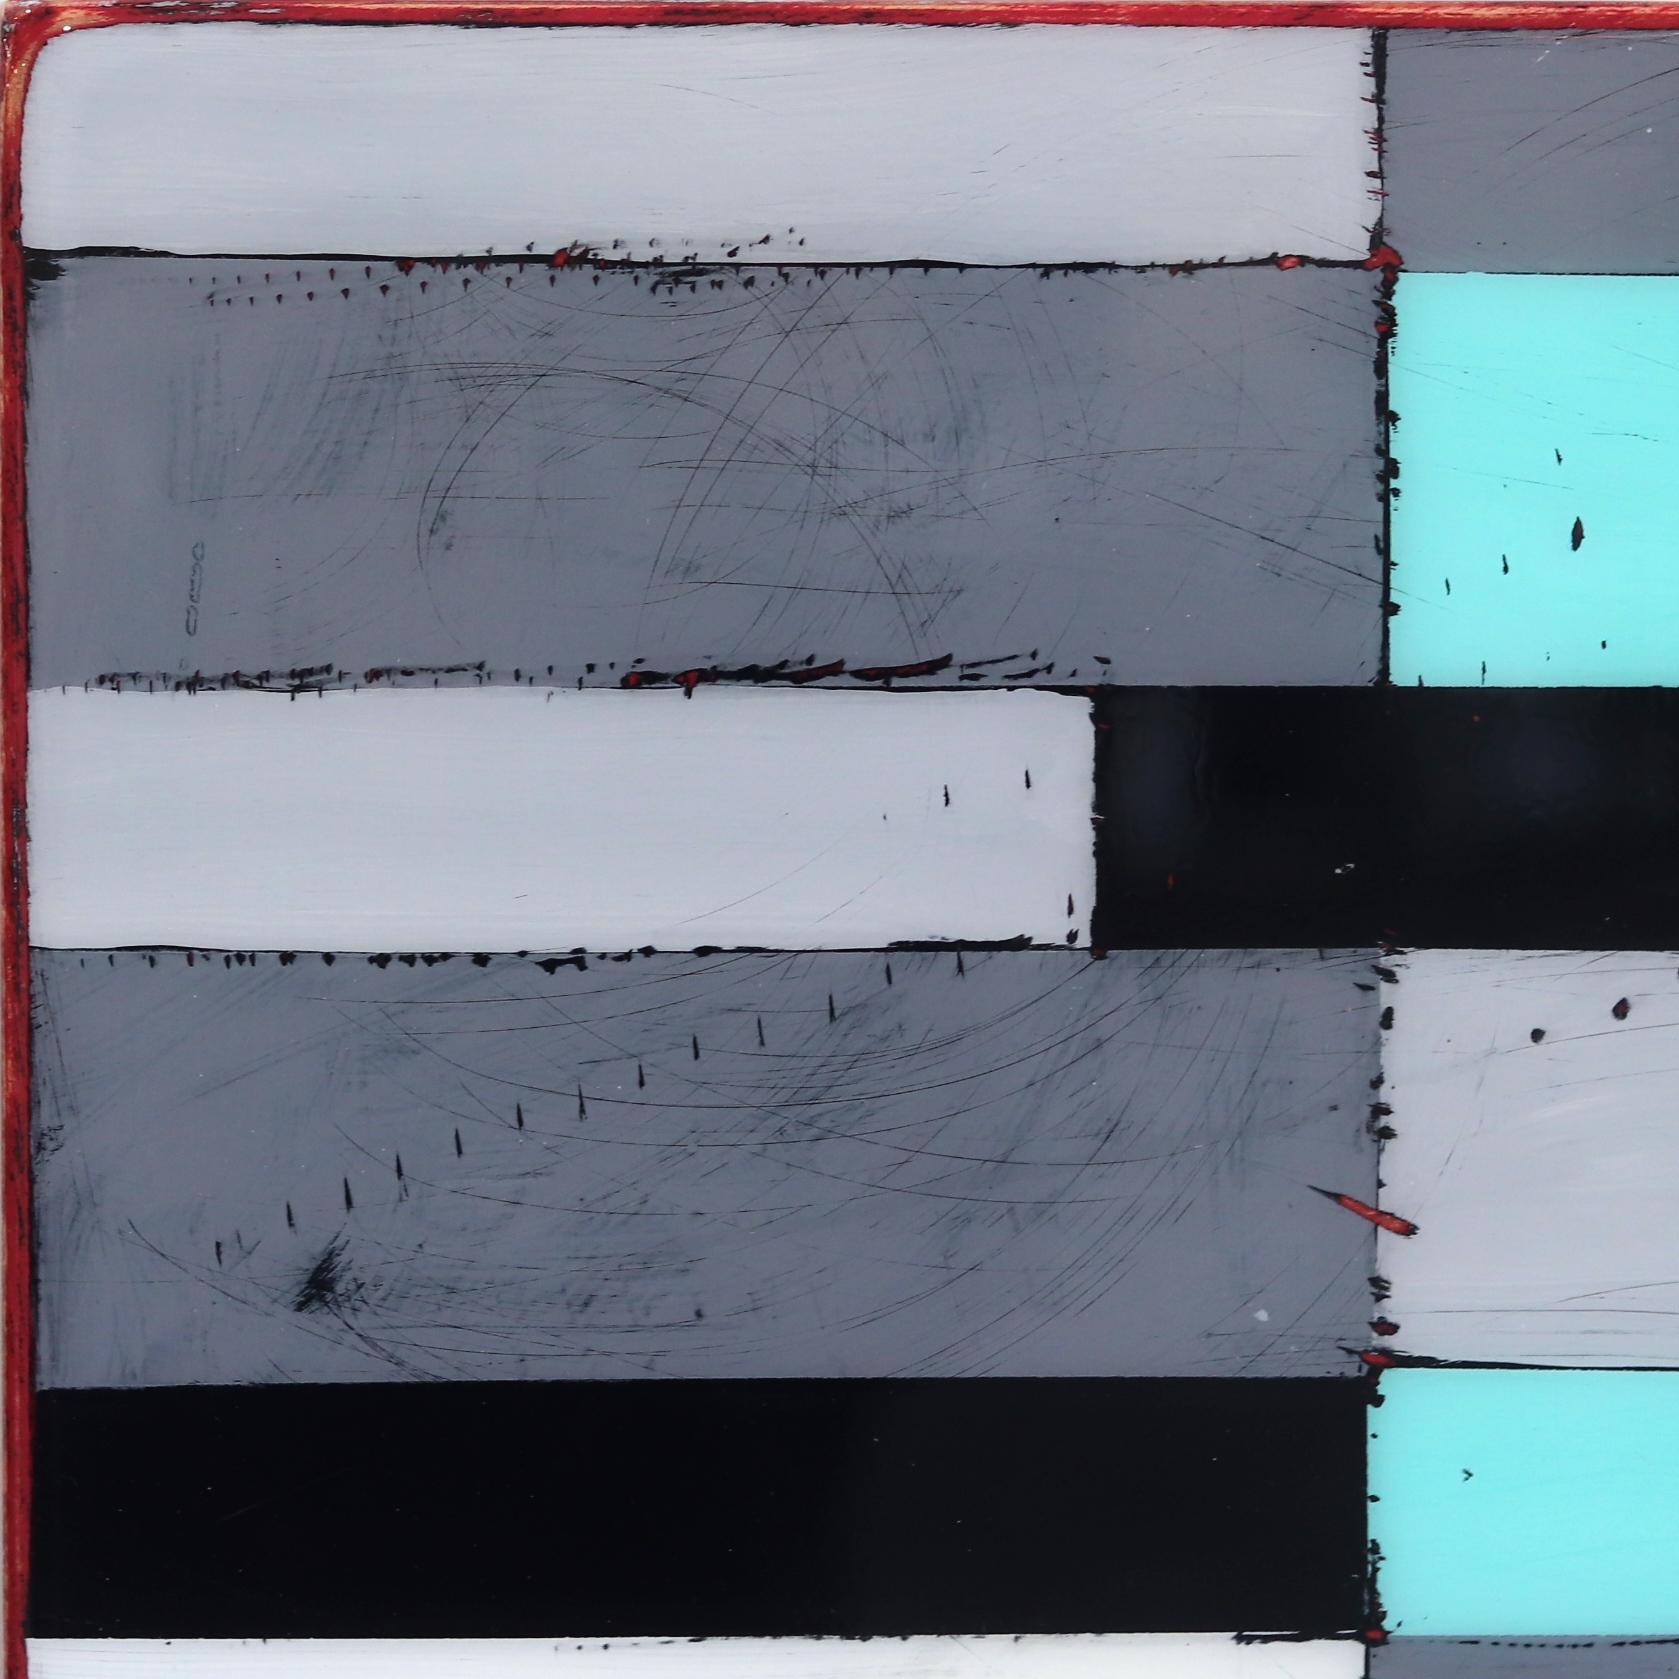 Ricky Hunt’s mixed media minimalist wall art is influenced by his tumultuous past that led to a paradigm shift in creativity and life. He covers the wood panel with layers of acrylic paint, removing some layers in the process to reveal the